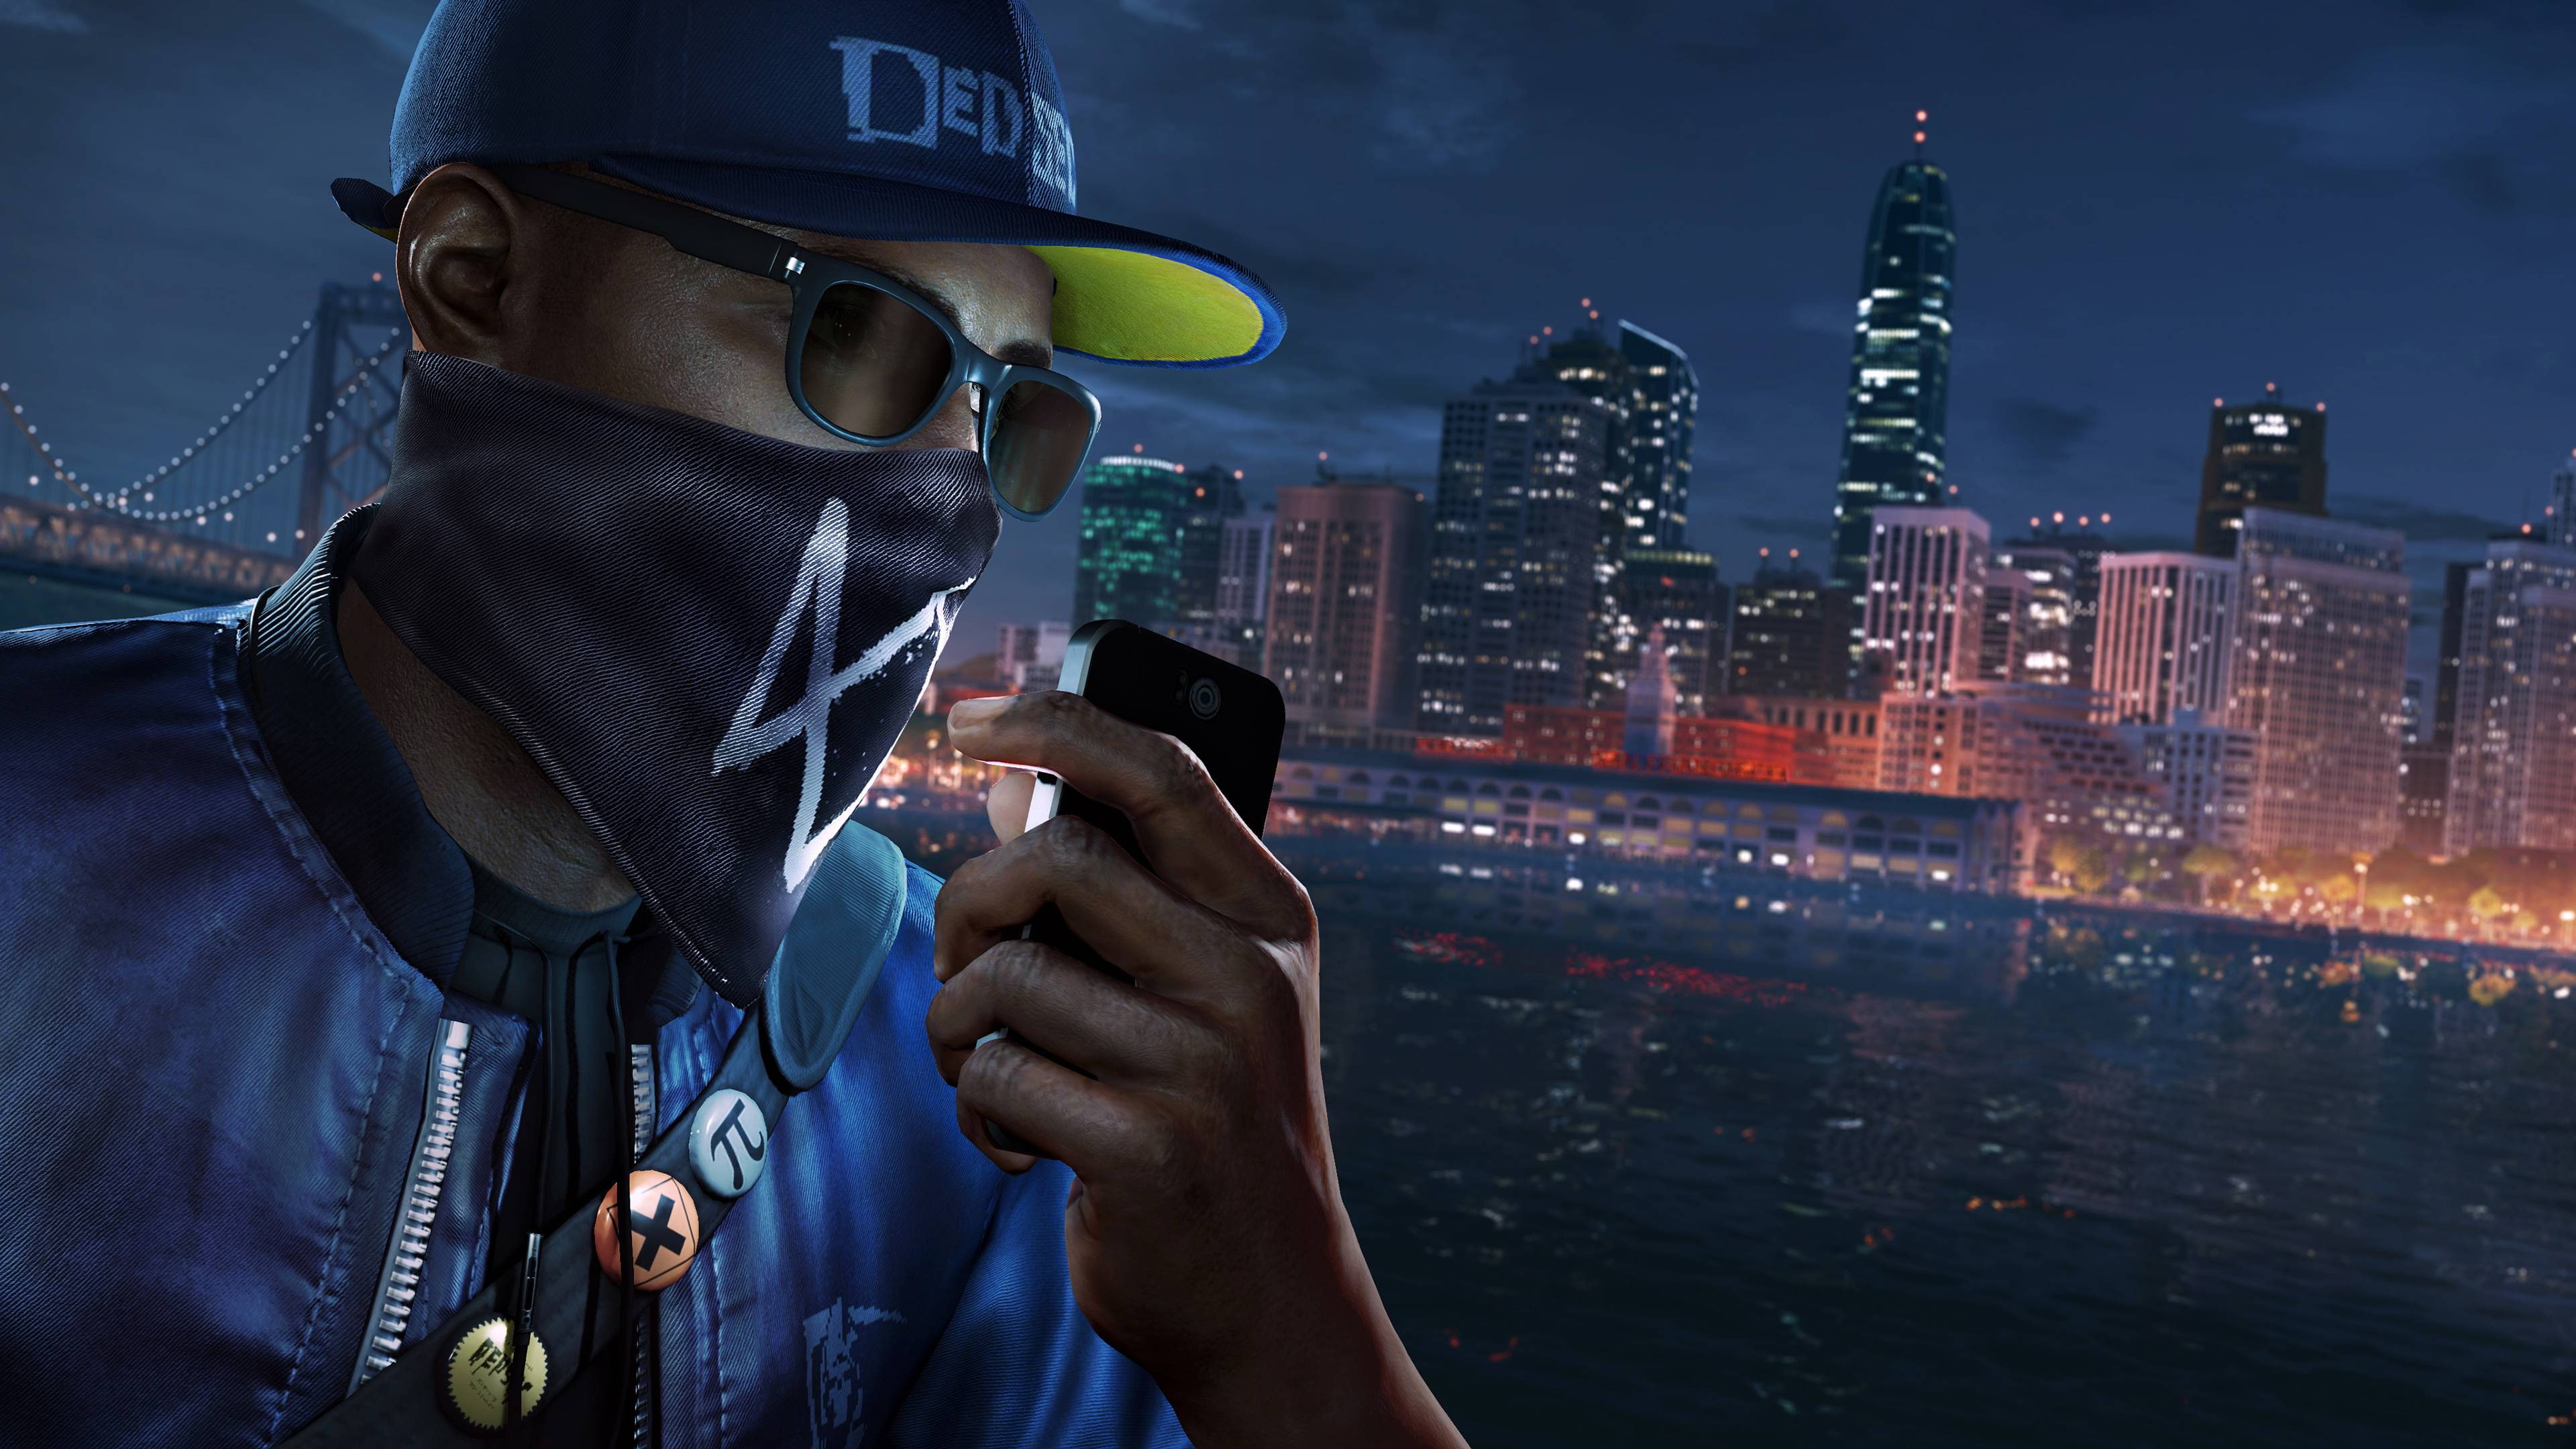 PS4 Pro, Watch Dogs 2, 4K, Marcus Holloway